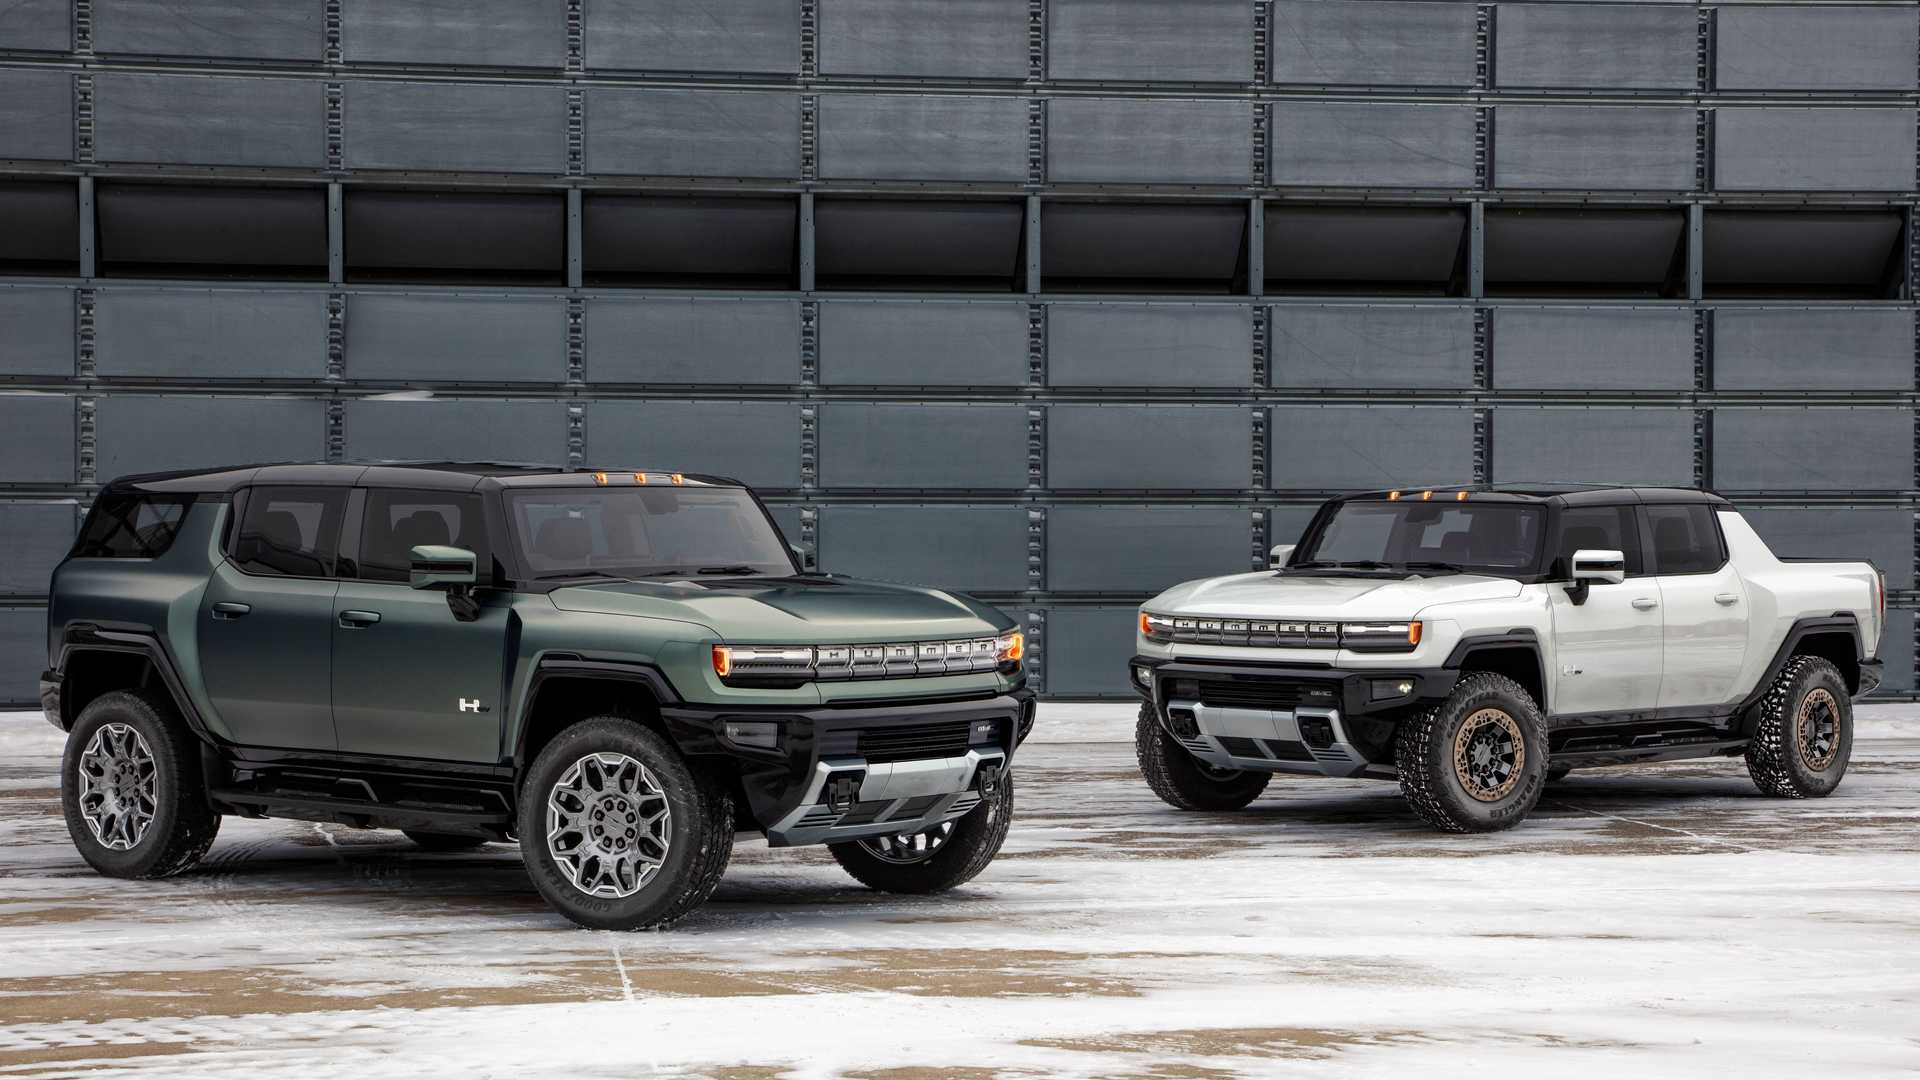 GMC Explains Why The Hummer EV SUV Is Down On Power Compared To Truck